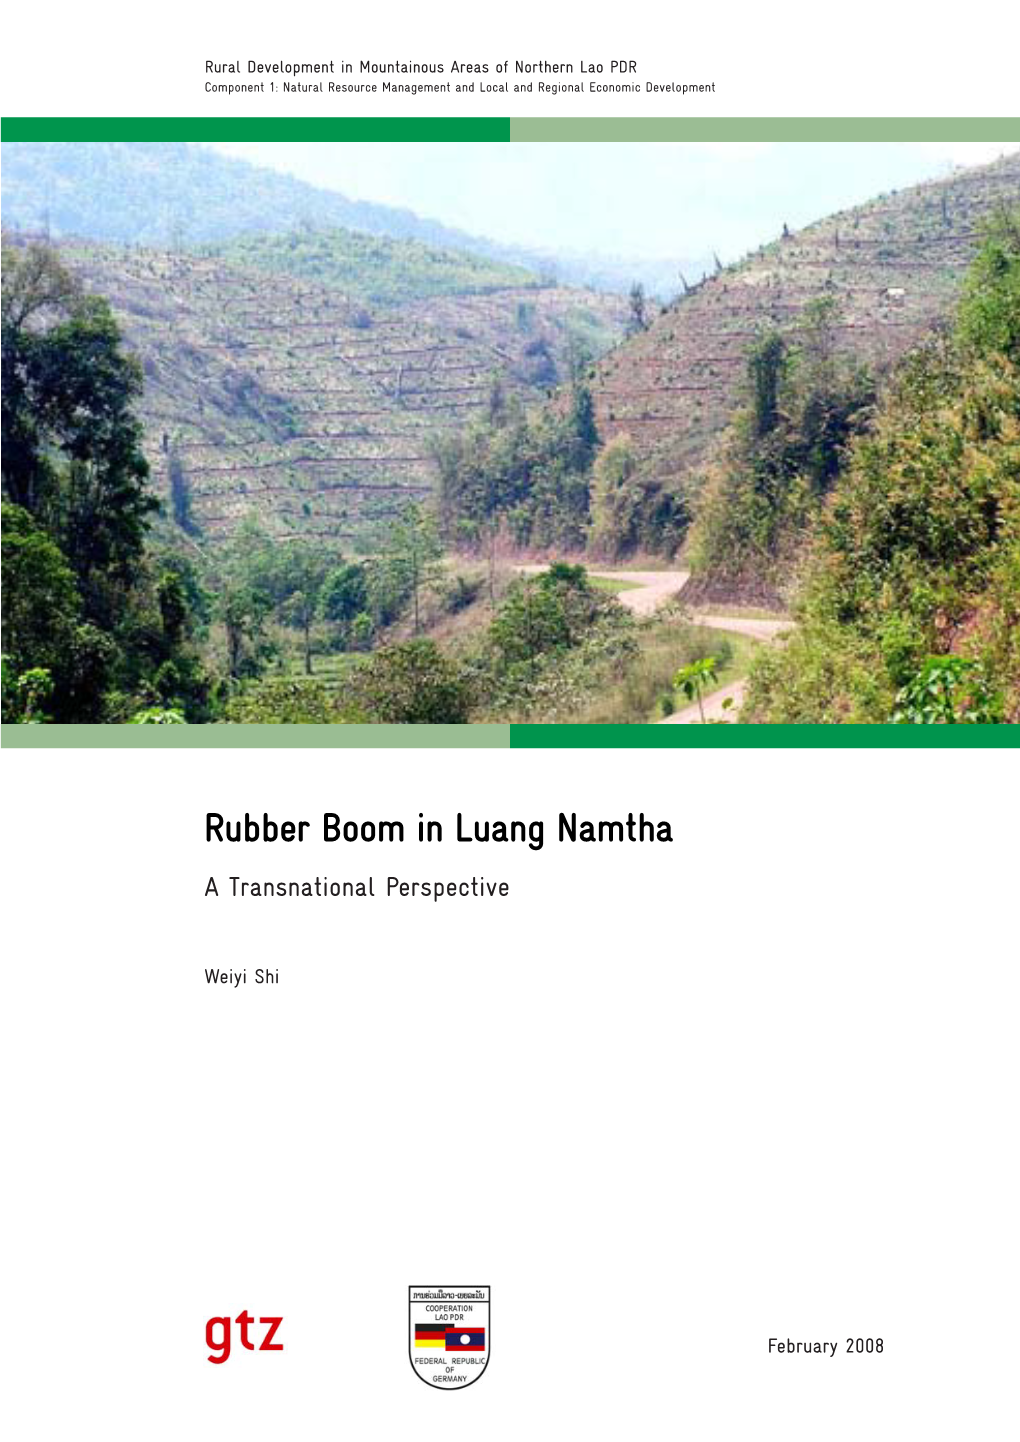 Rubber Boom in Luang Namtha a Transnational Perspective